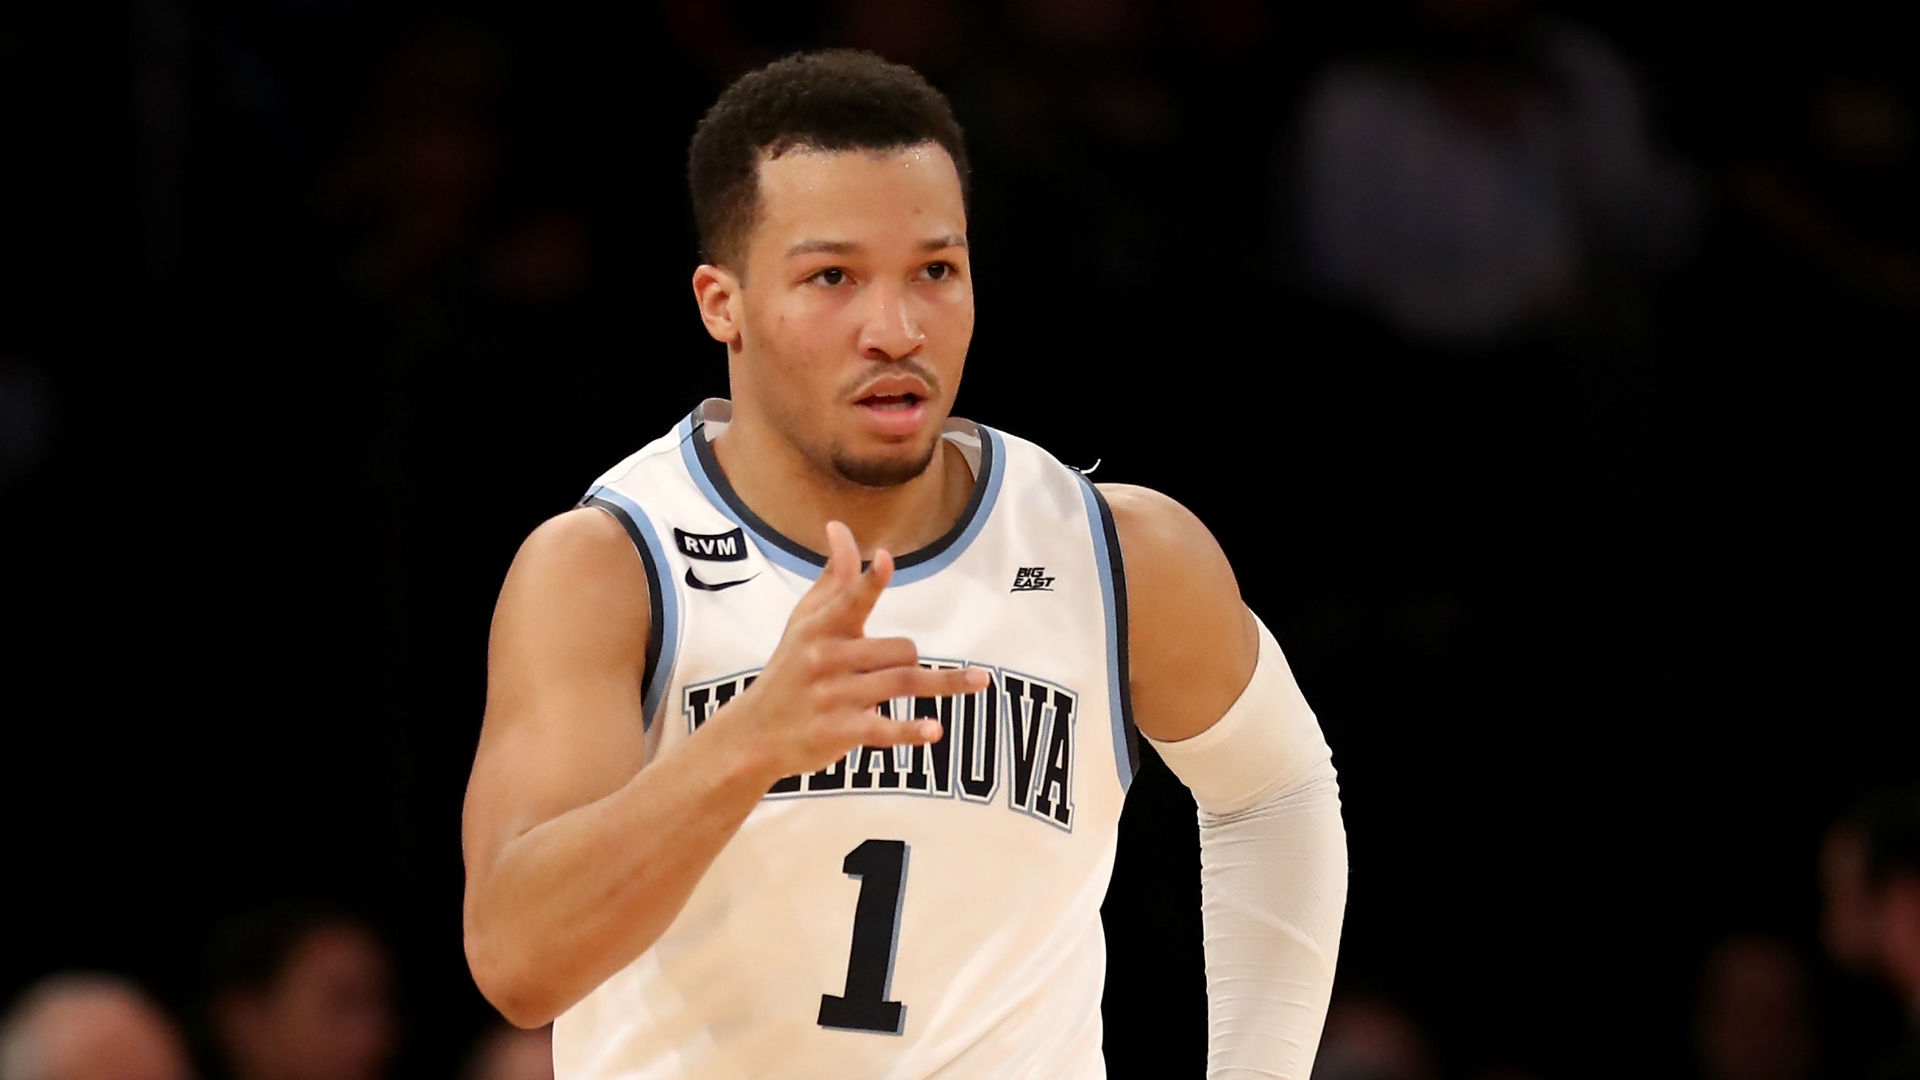 NCAA Final Four 2018: Villanova's Jalen Brunson can own this season forever with one more quiet opus